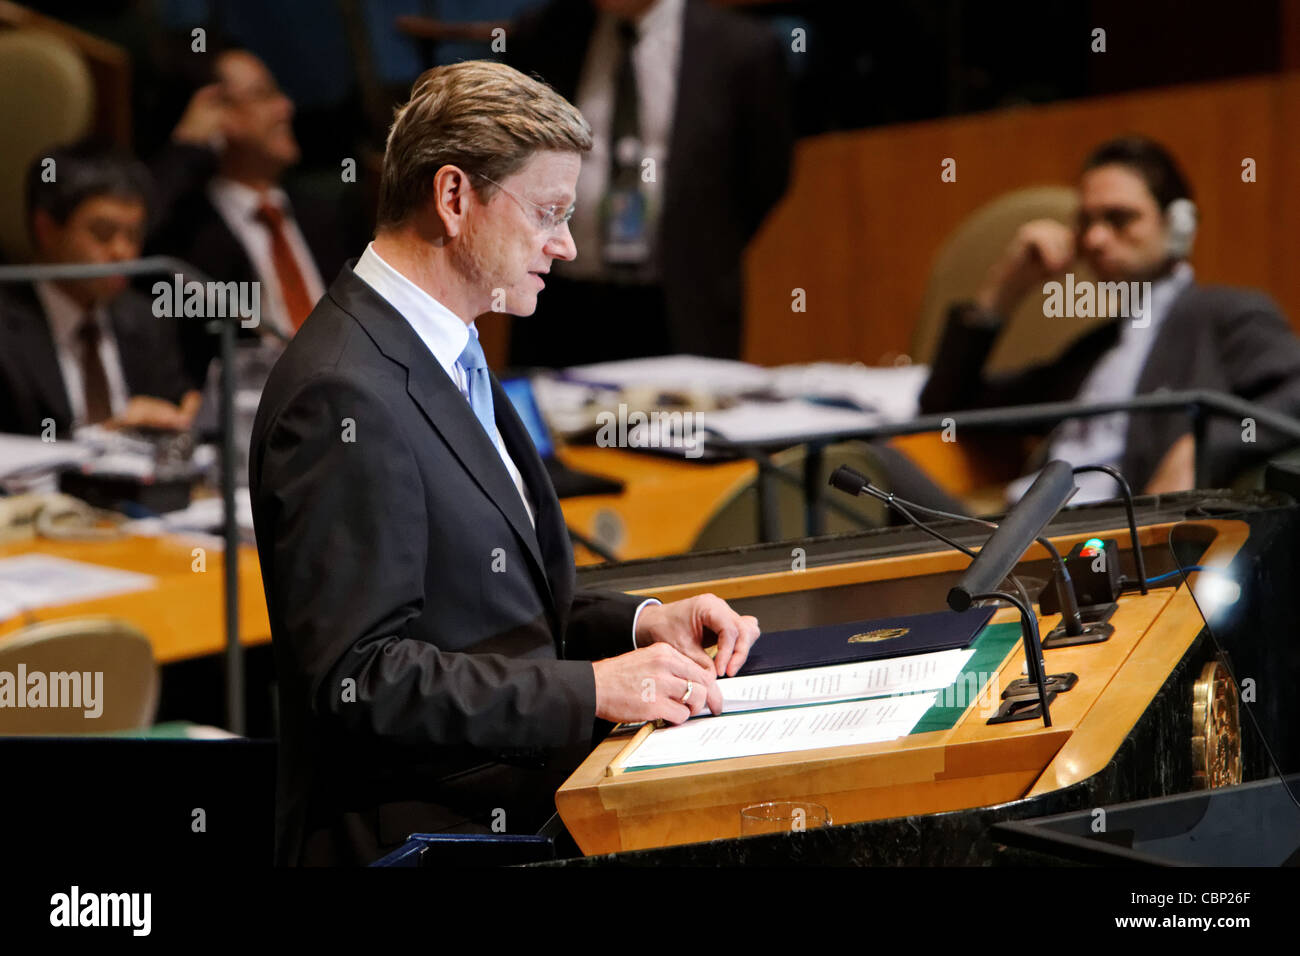 German Foreign Minister Guido Westerwelle makes a speech during the 2010 United Nations General Assembly at UN Headquarters in N Stock Photo